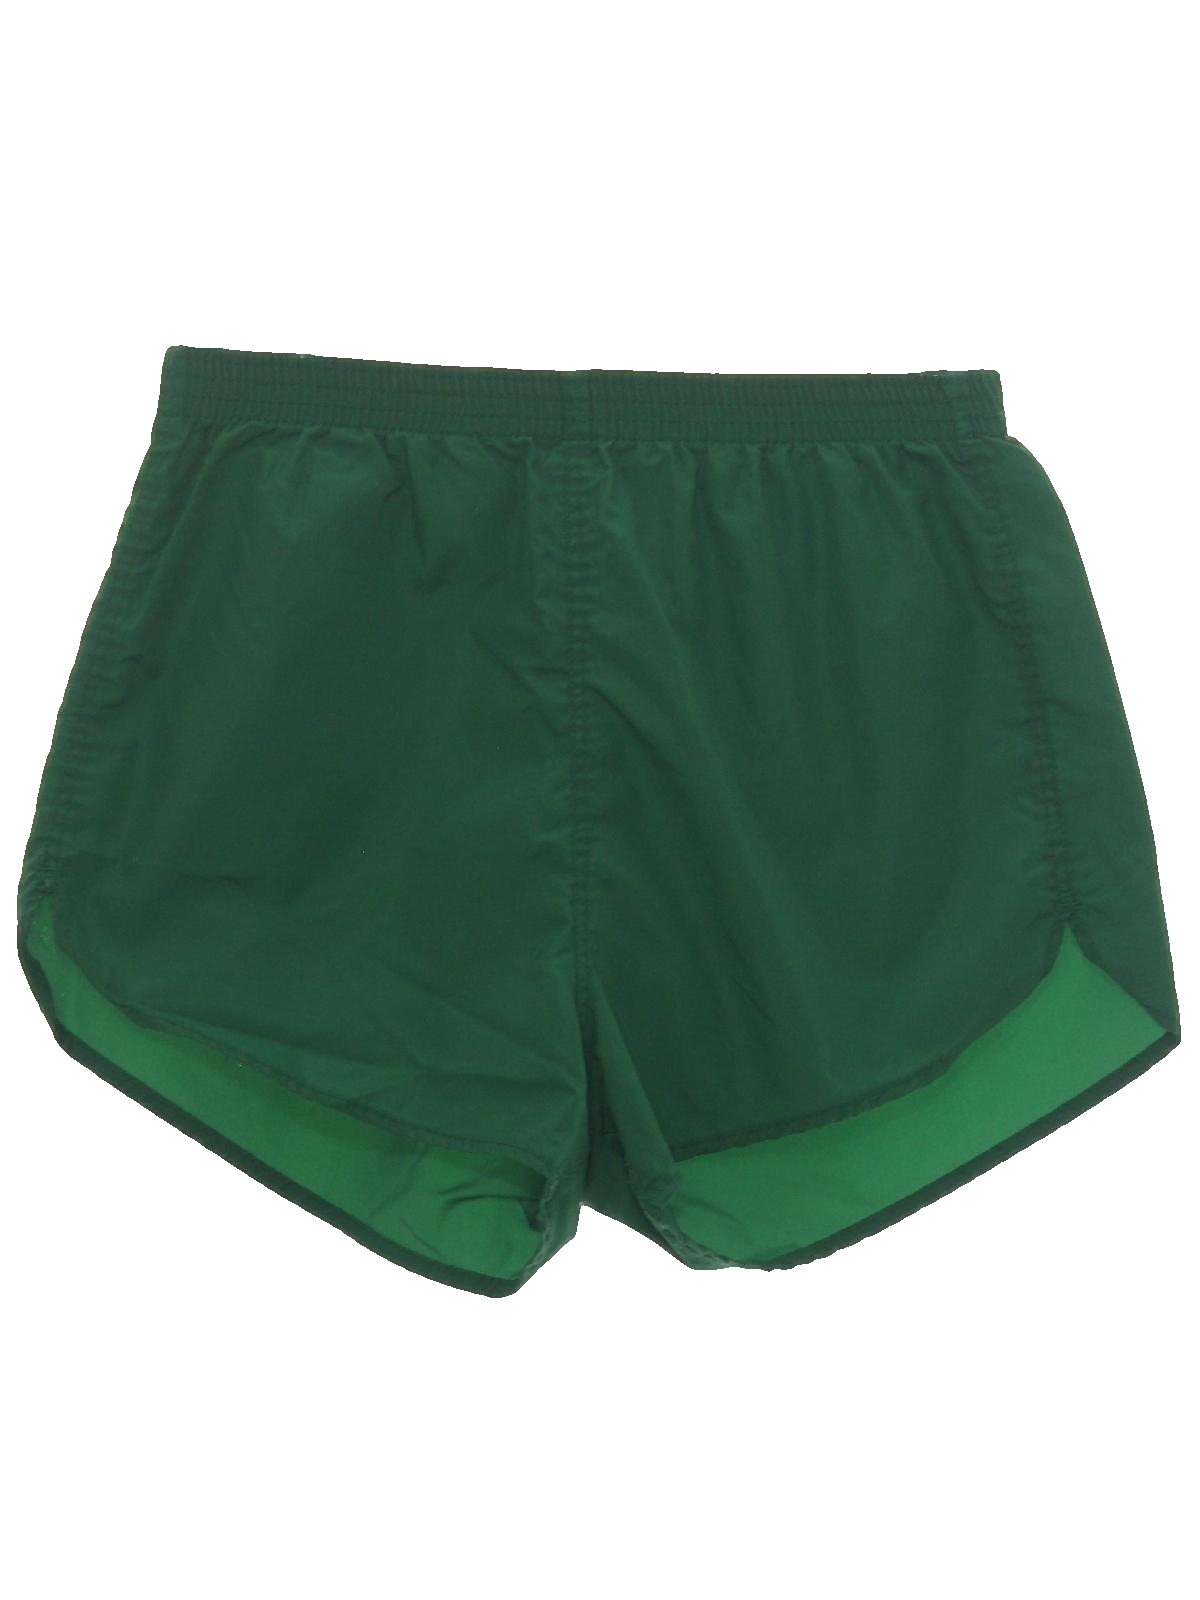 Seventies Vintage Shorts: 70s -Russell Athletic- Mens Green background ...